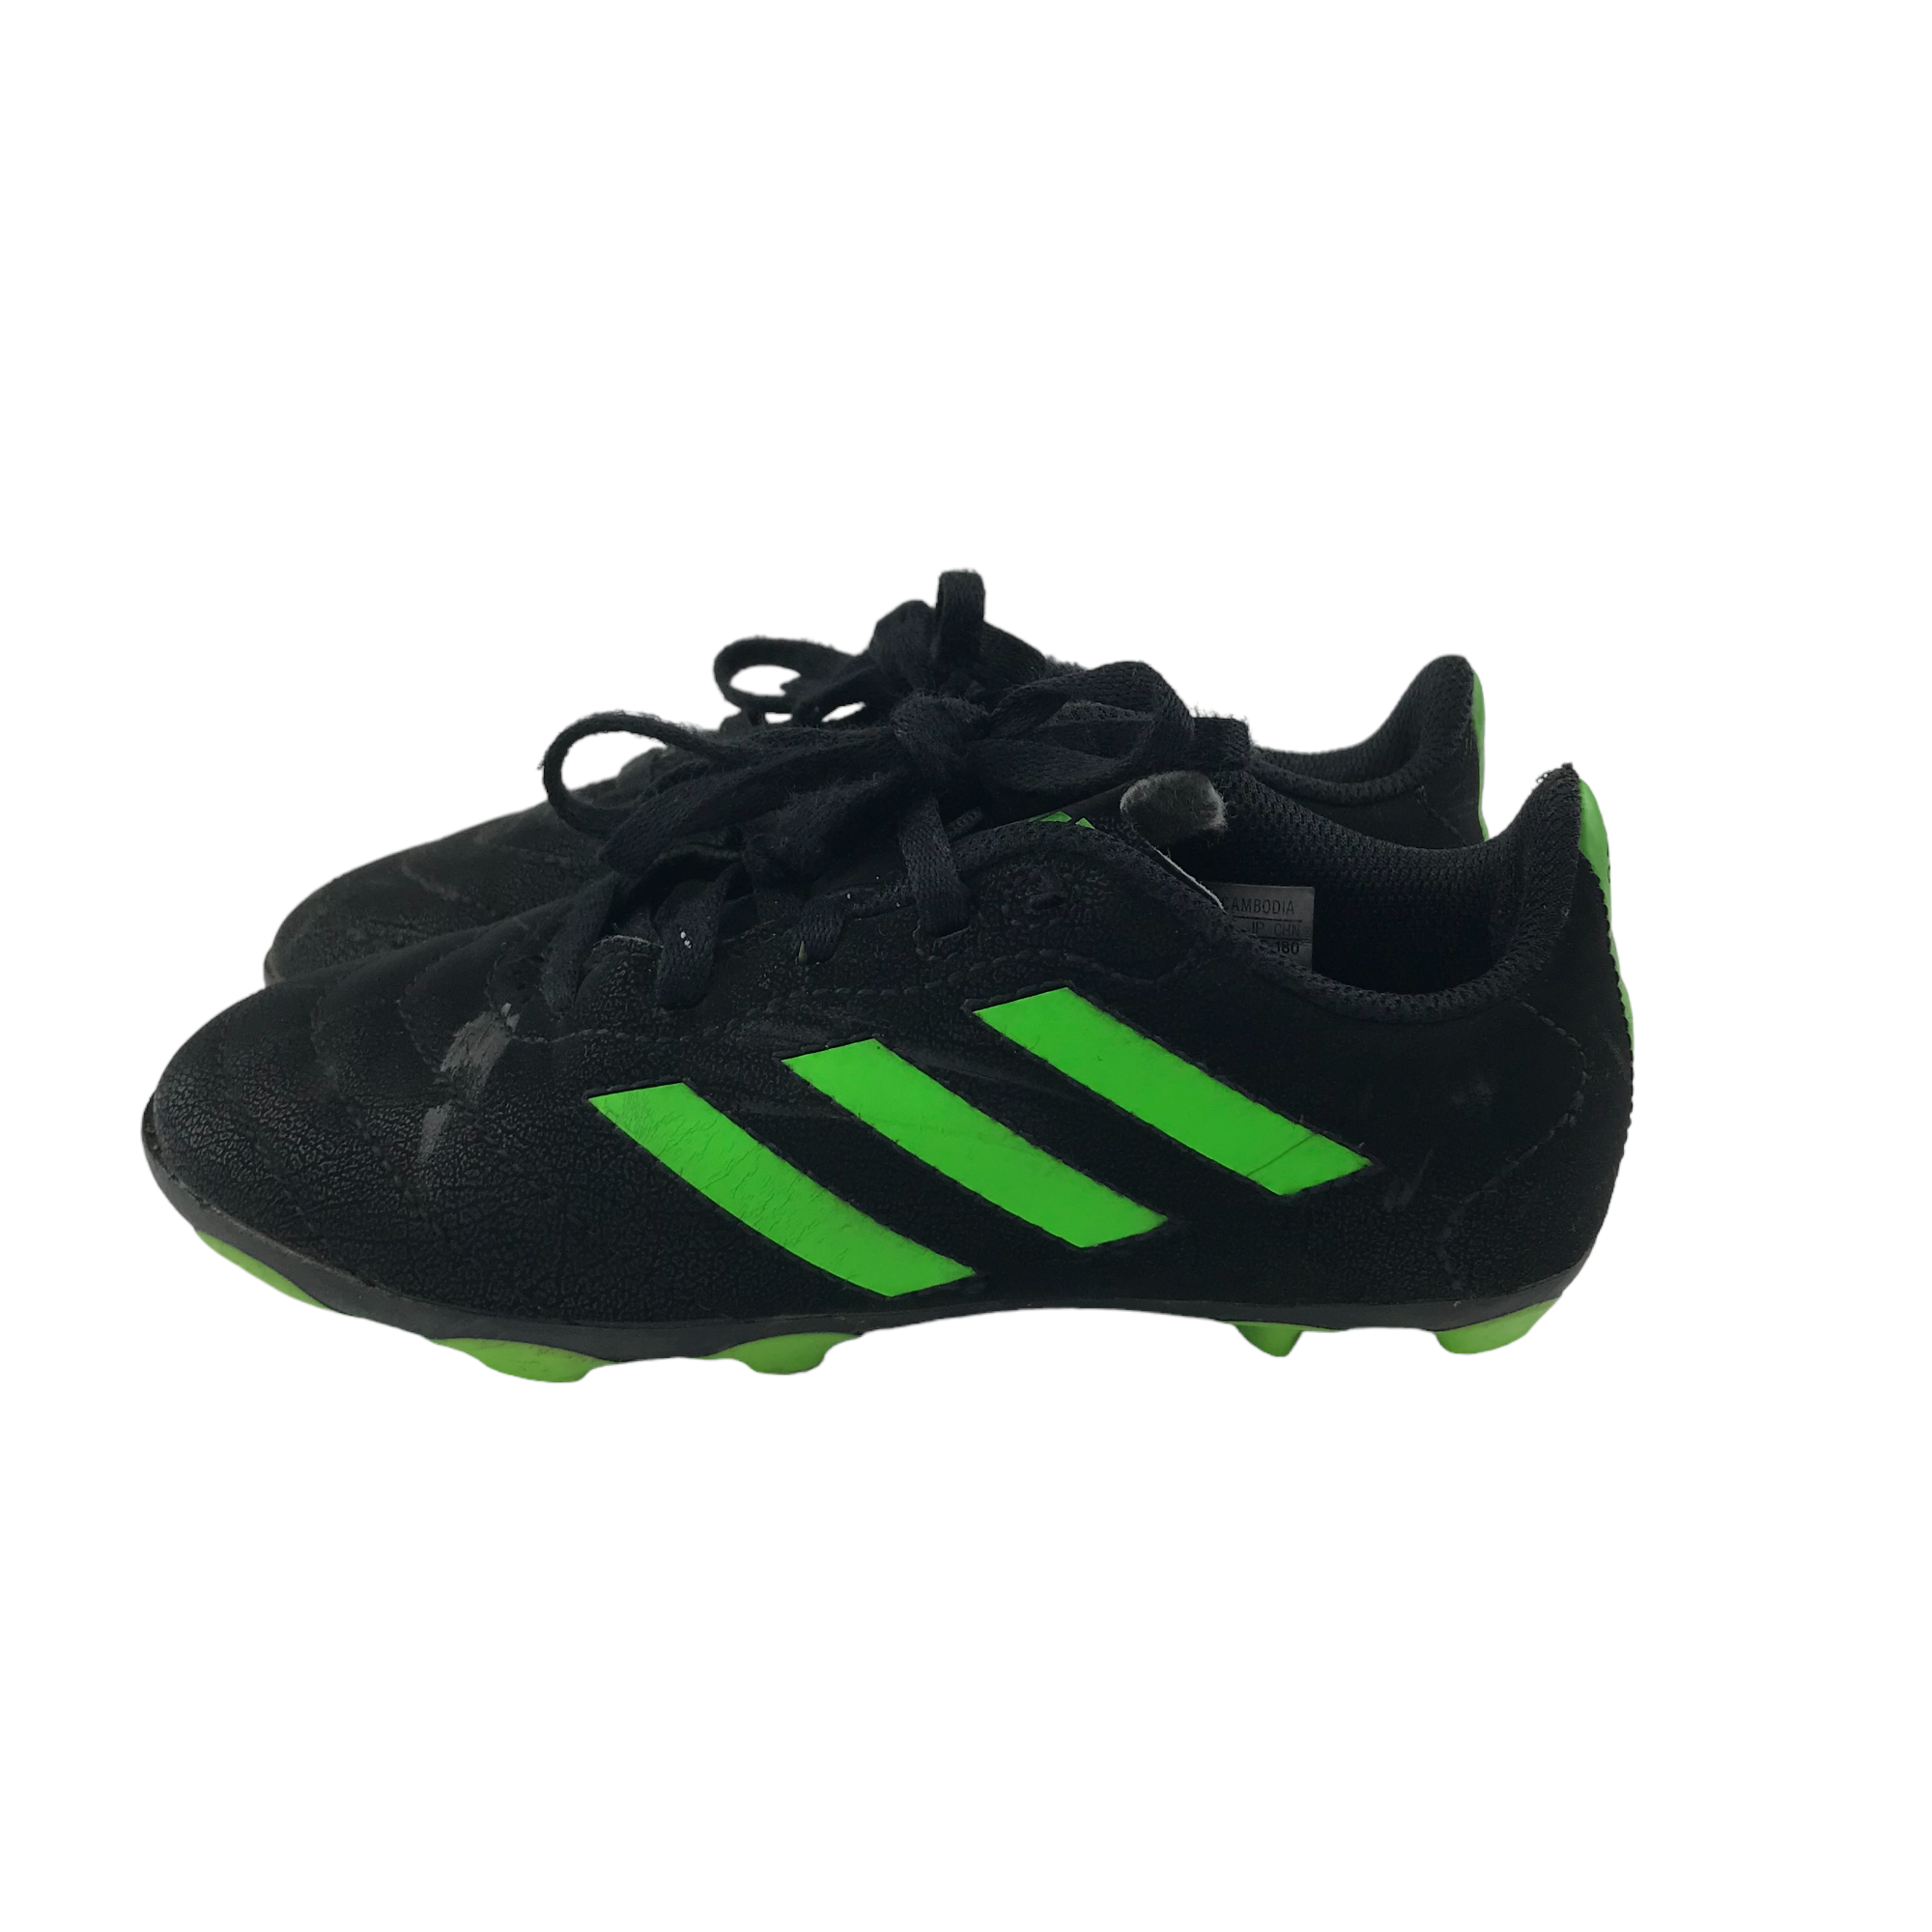 Best Rugby Shoes for 2021 Available in the Market | Full Overview